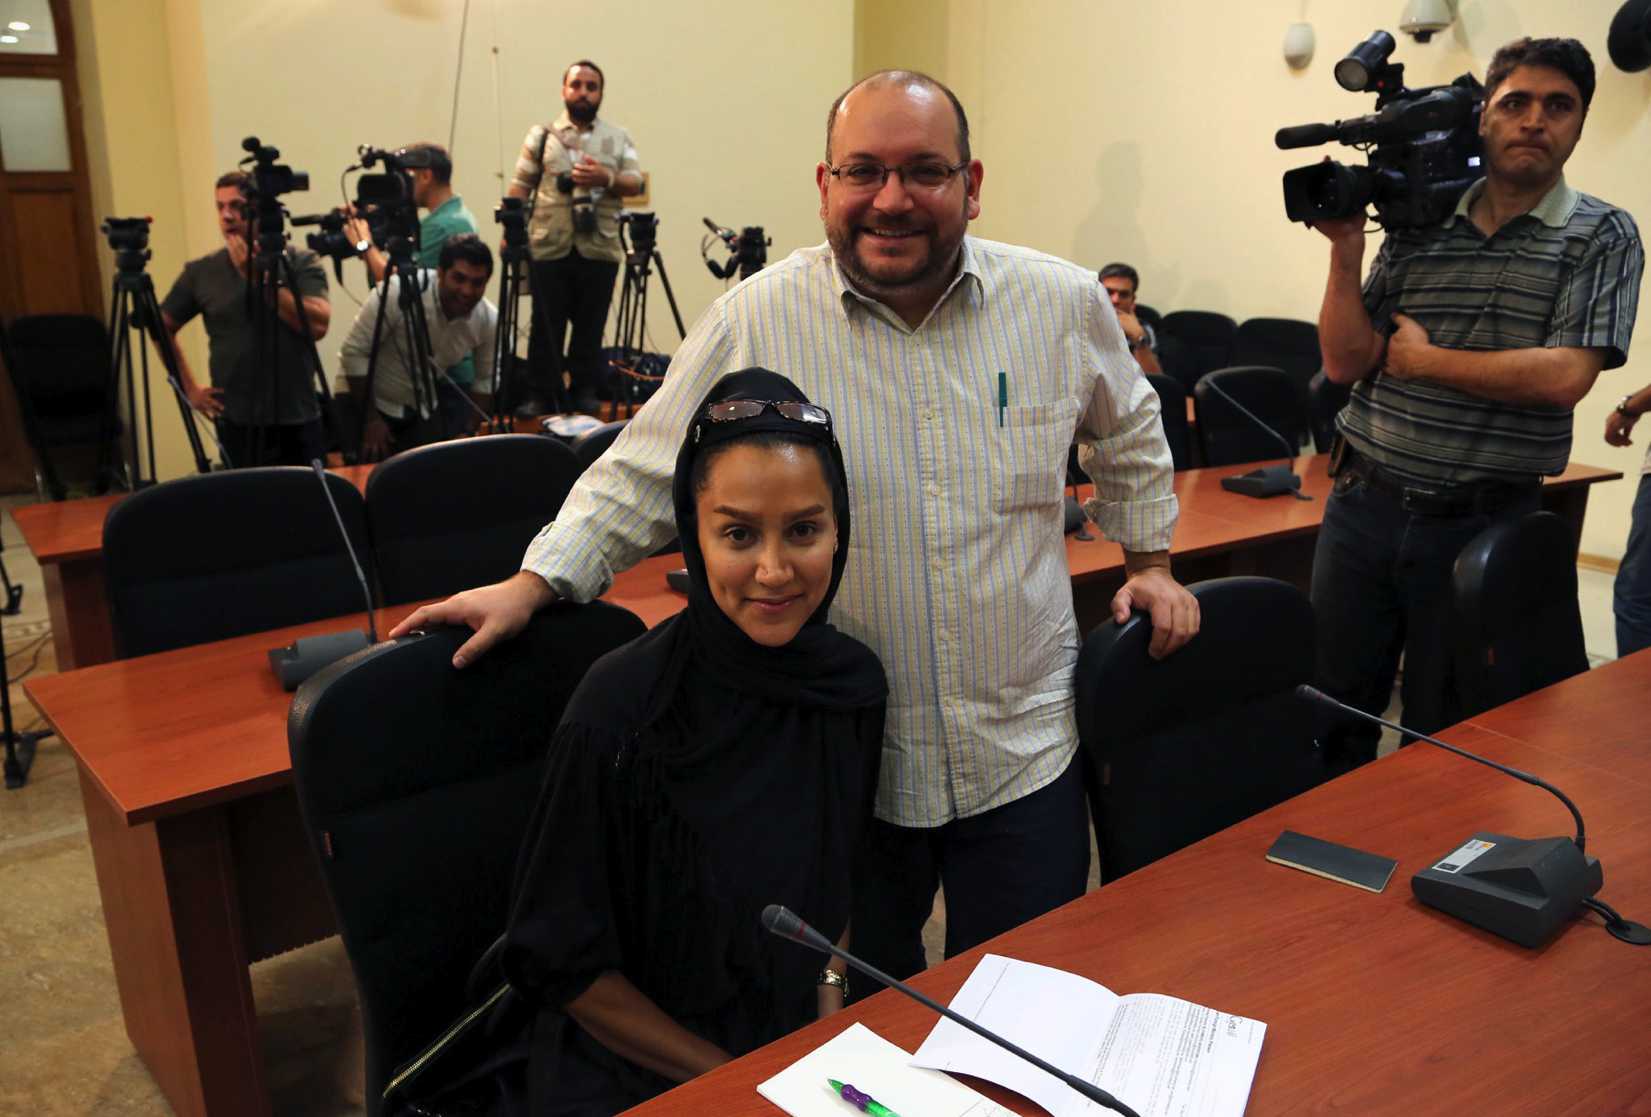 Washington <i>Post</i> Iranian-American journalist Jason Rezaian, right, and his Iranian wife Yeganeh Salehi, who works for the the <i>National</i>, an UAE newspaper, during a Foreign Ministry weekly press conference in Tehran on Sept. 10, 2013 (EPA)